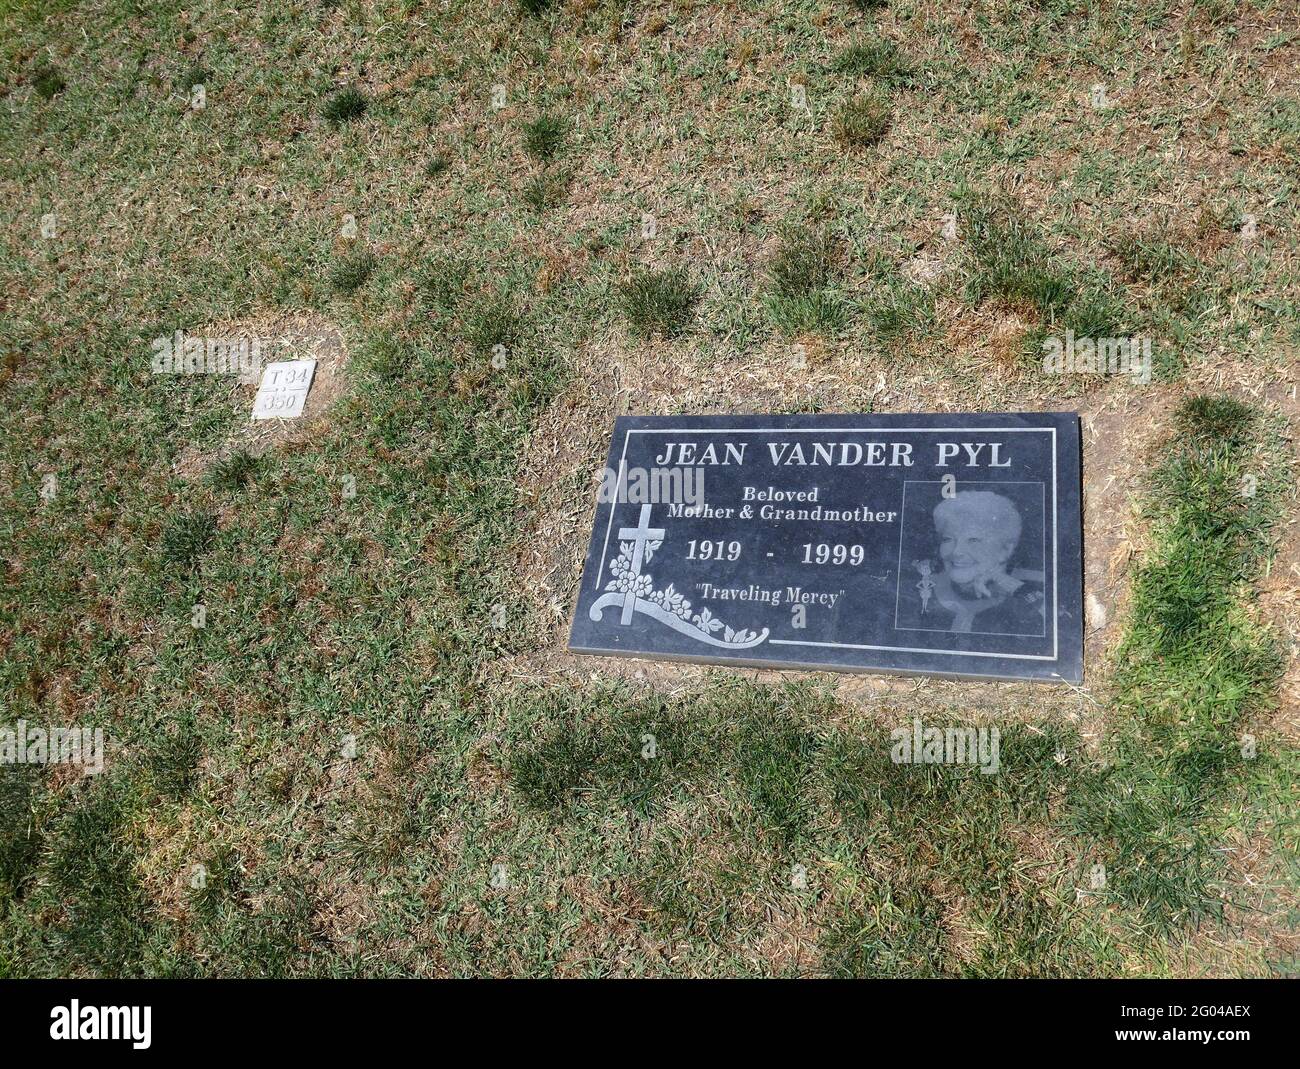 Lake Forest, California, USA 29th May 2021 A general view of atmosphere of actress Jean Vander Pyl's Grave at Ascension Cemetery in Lake Forest, California, USA. She was best known for the voice of Wilma Flintstone of the Hanna-Barbera Cartoon The Flintstones. Photo by Barry King/Alamy Stock Photo Stock Photo